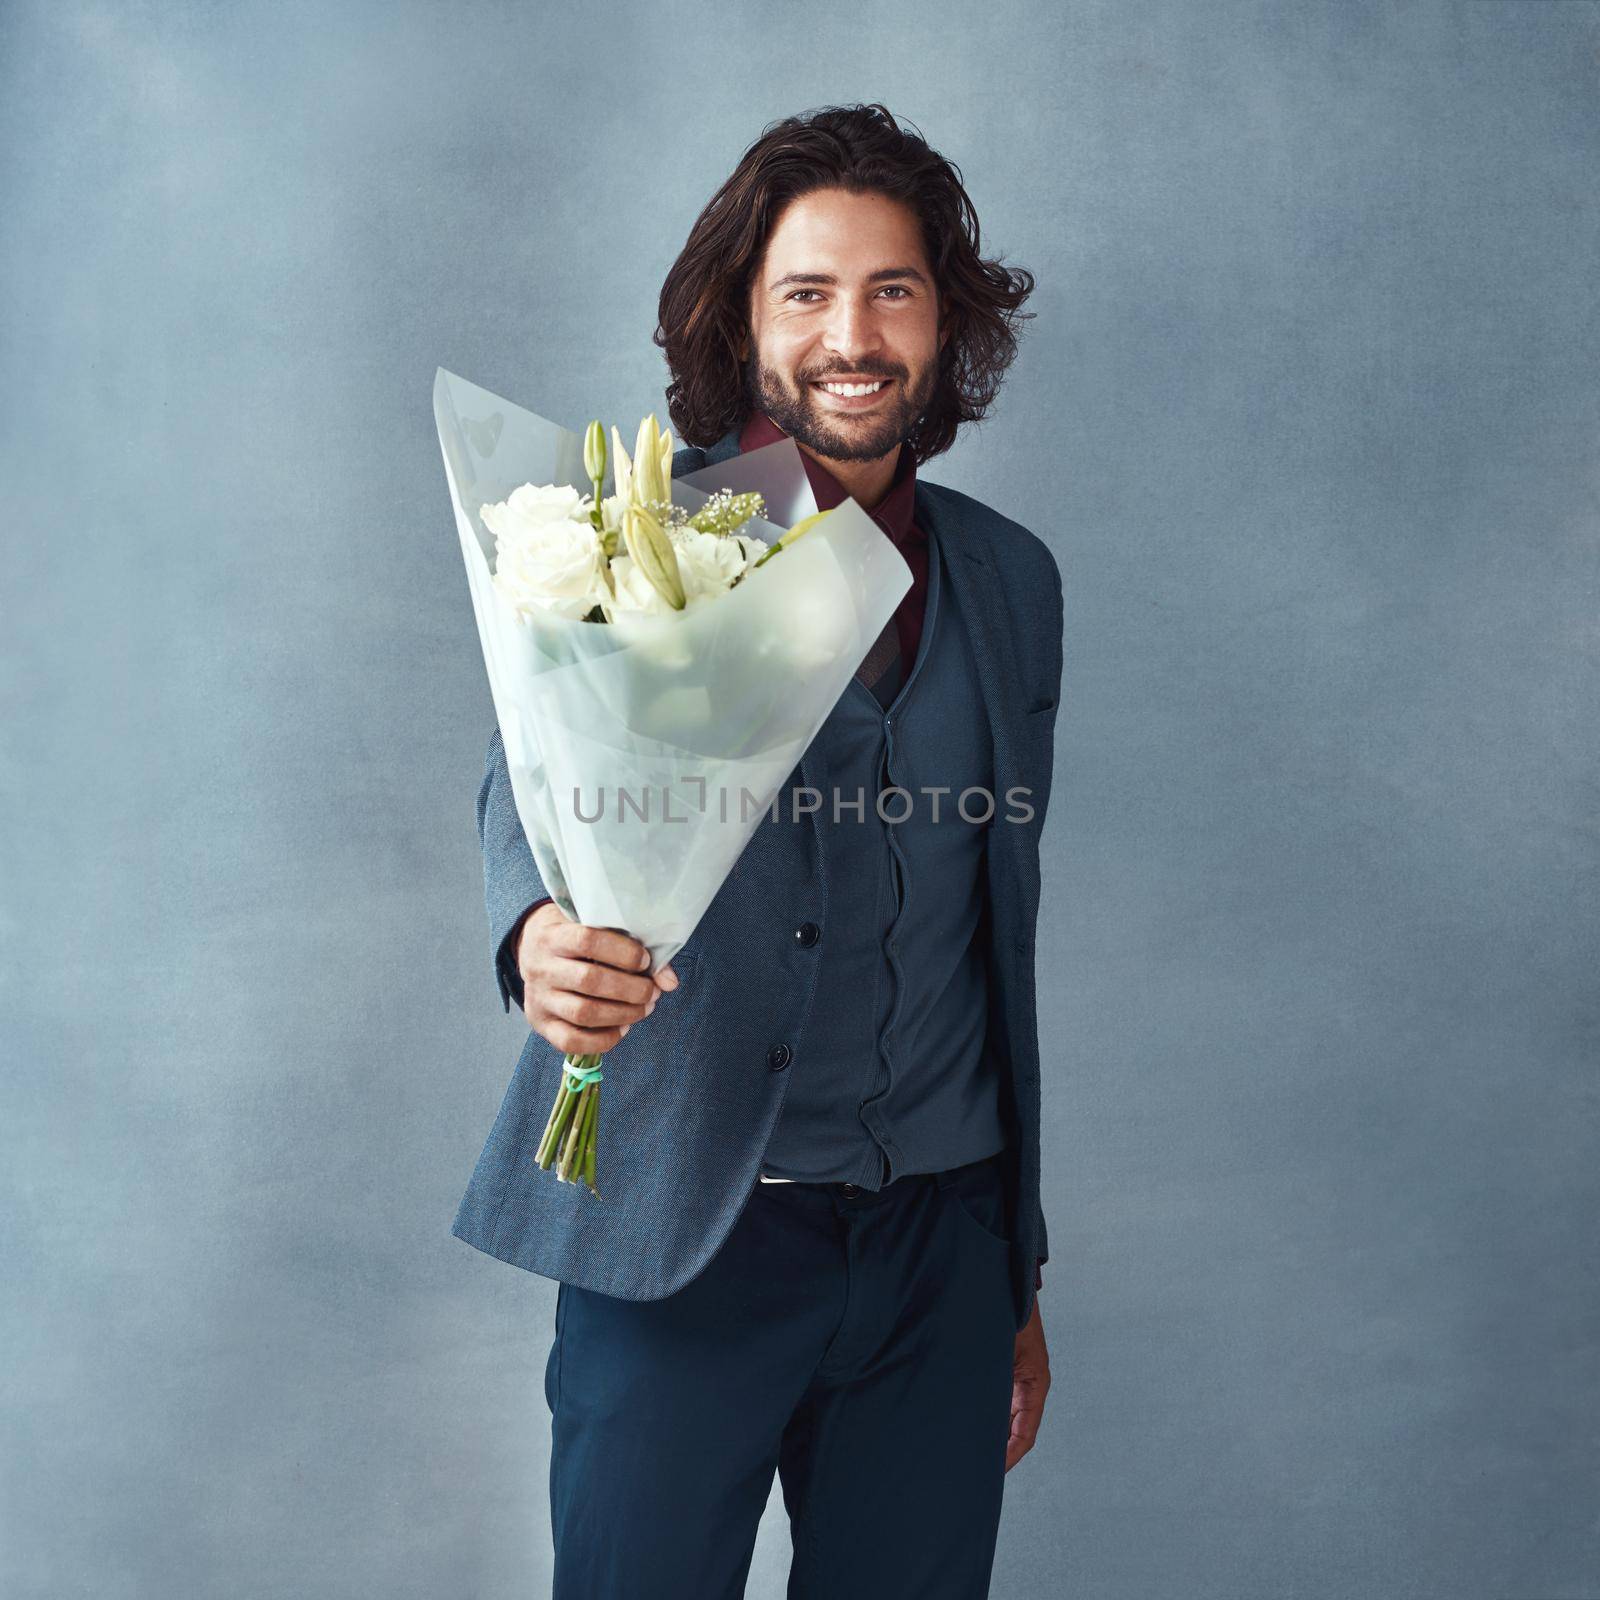 He knows how to turn up the romance. Studio shot of a stylishly dressed handsome young man holding a bouquet of flowers against a gray background